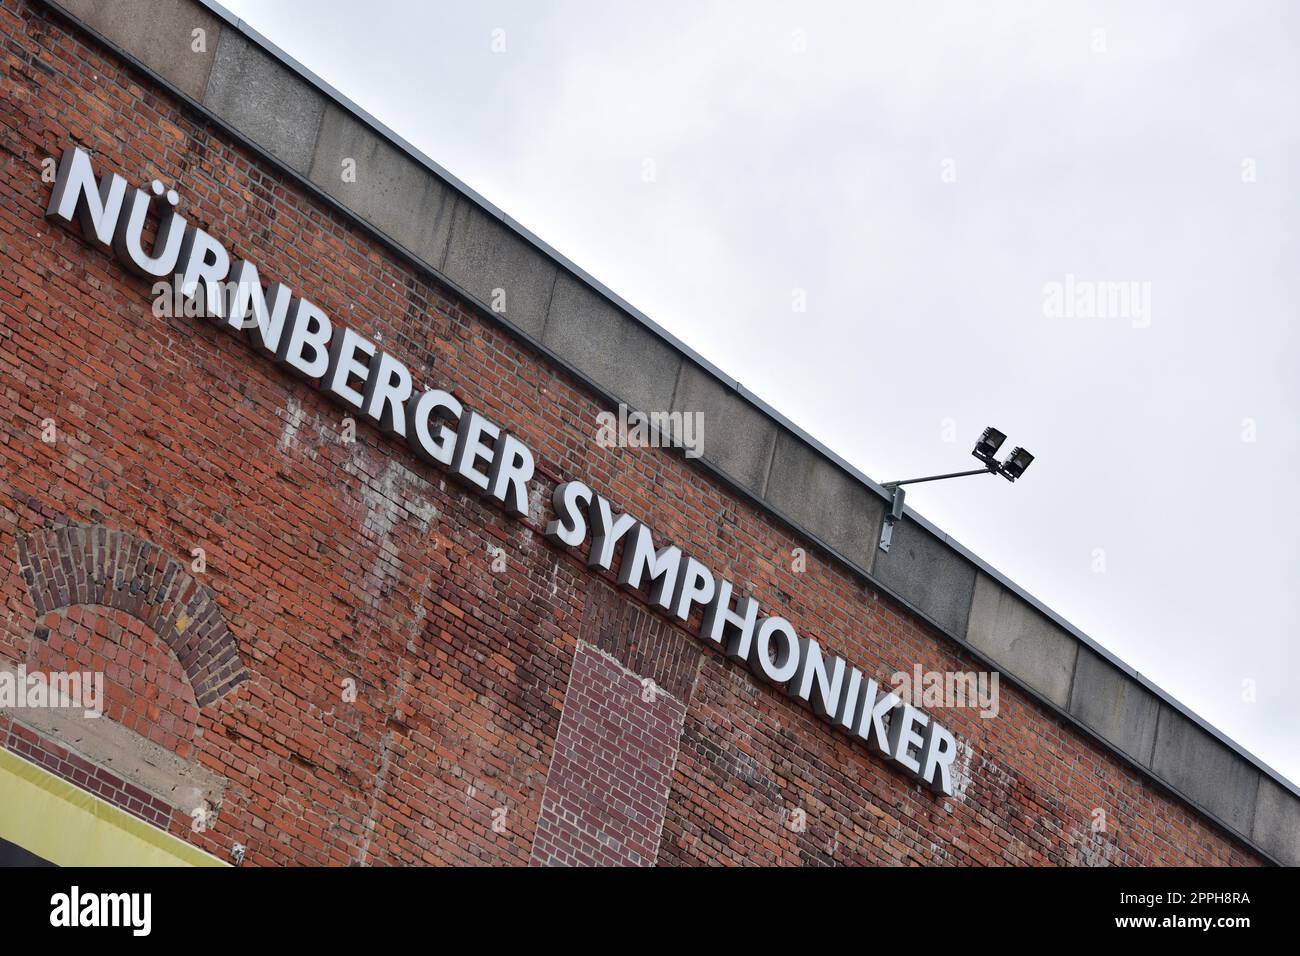 Music hall of the Nuremberg Symphony Orchestra Stock Photo